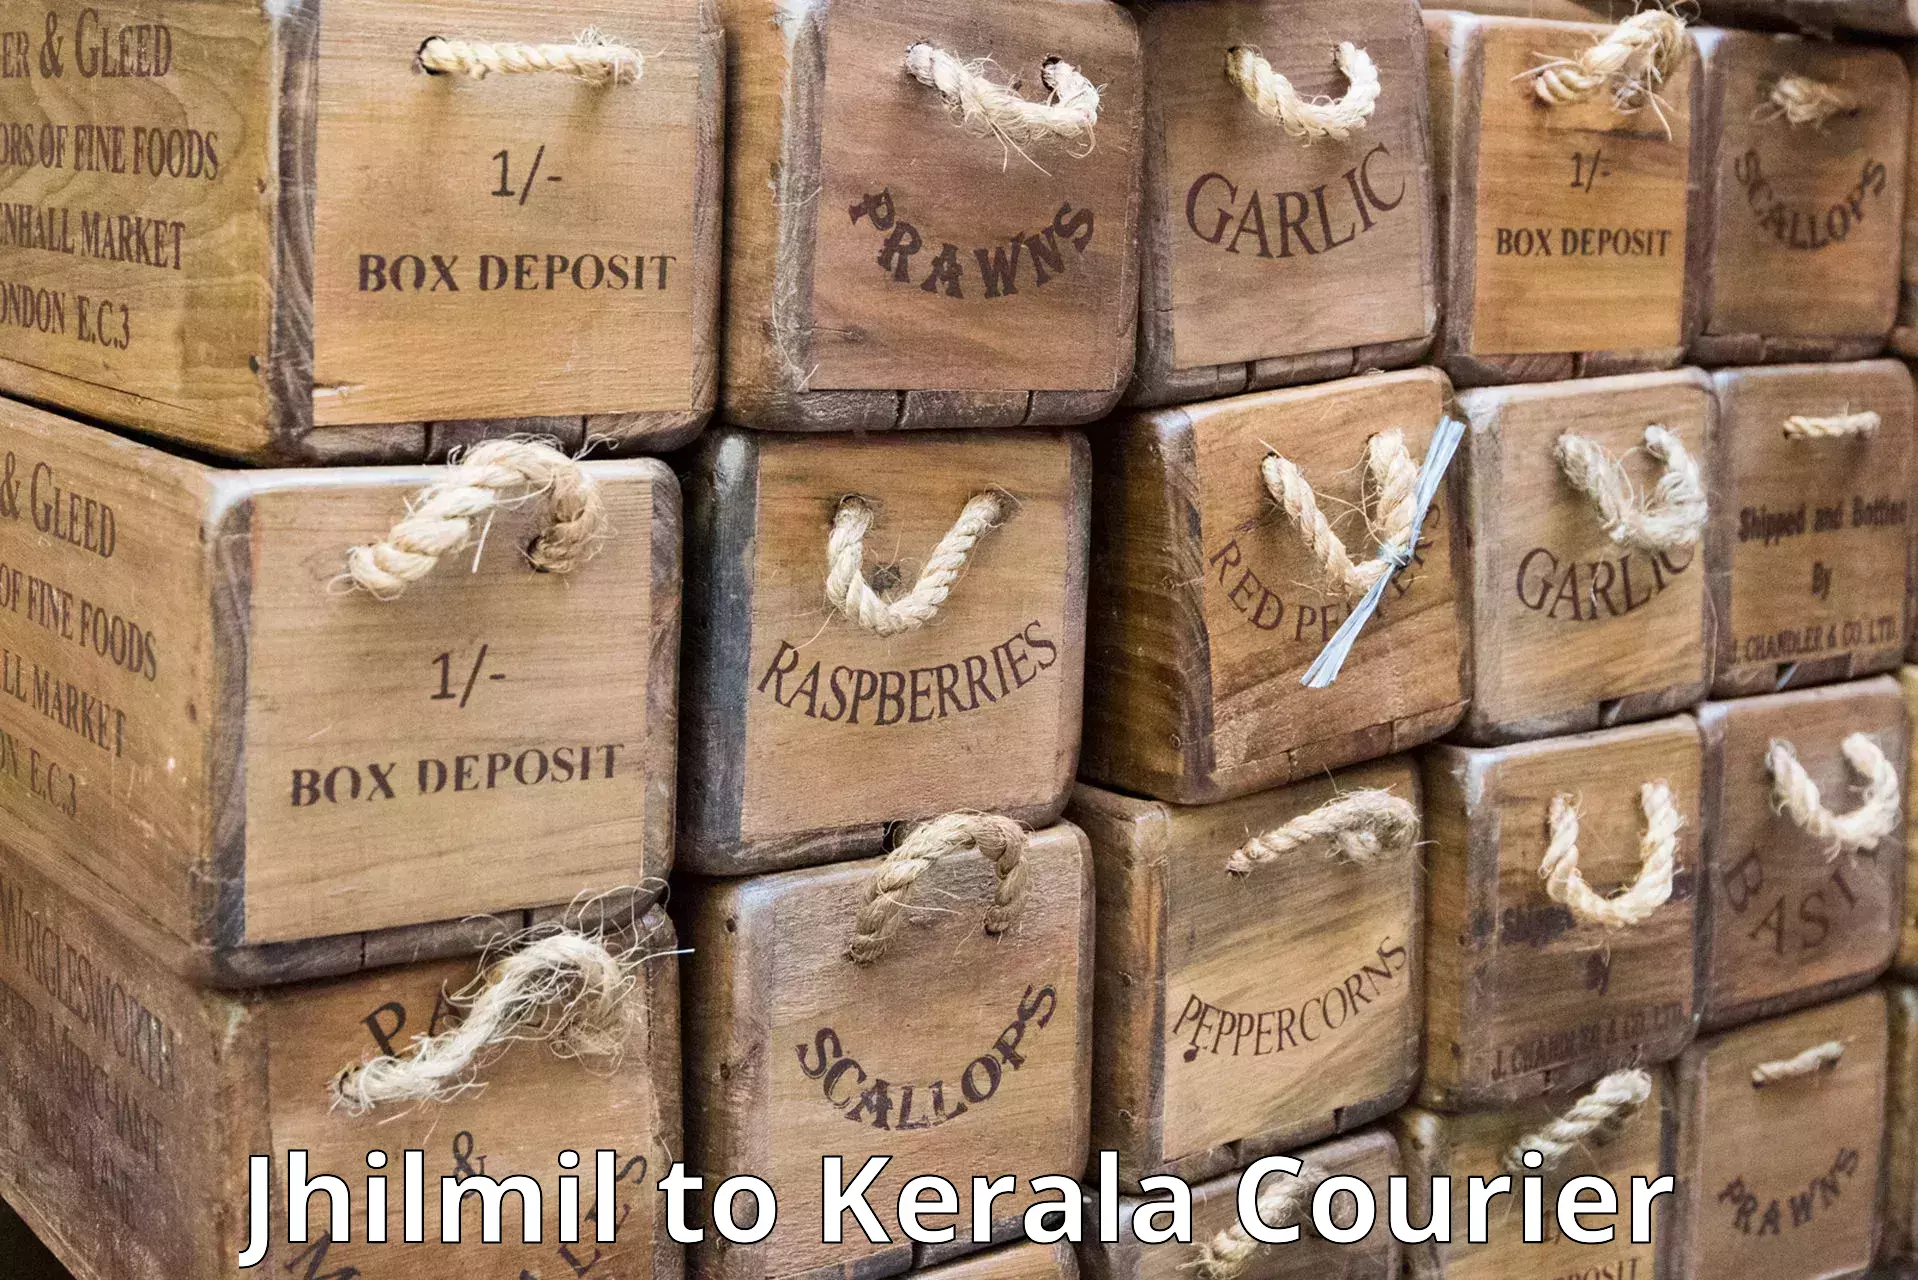 Tailored delivery services Jhilmil to Cochin Port Kochi